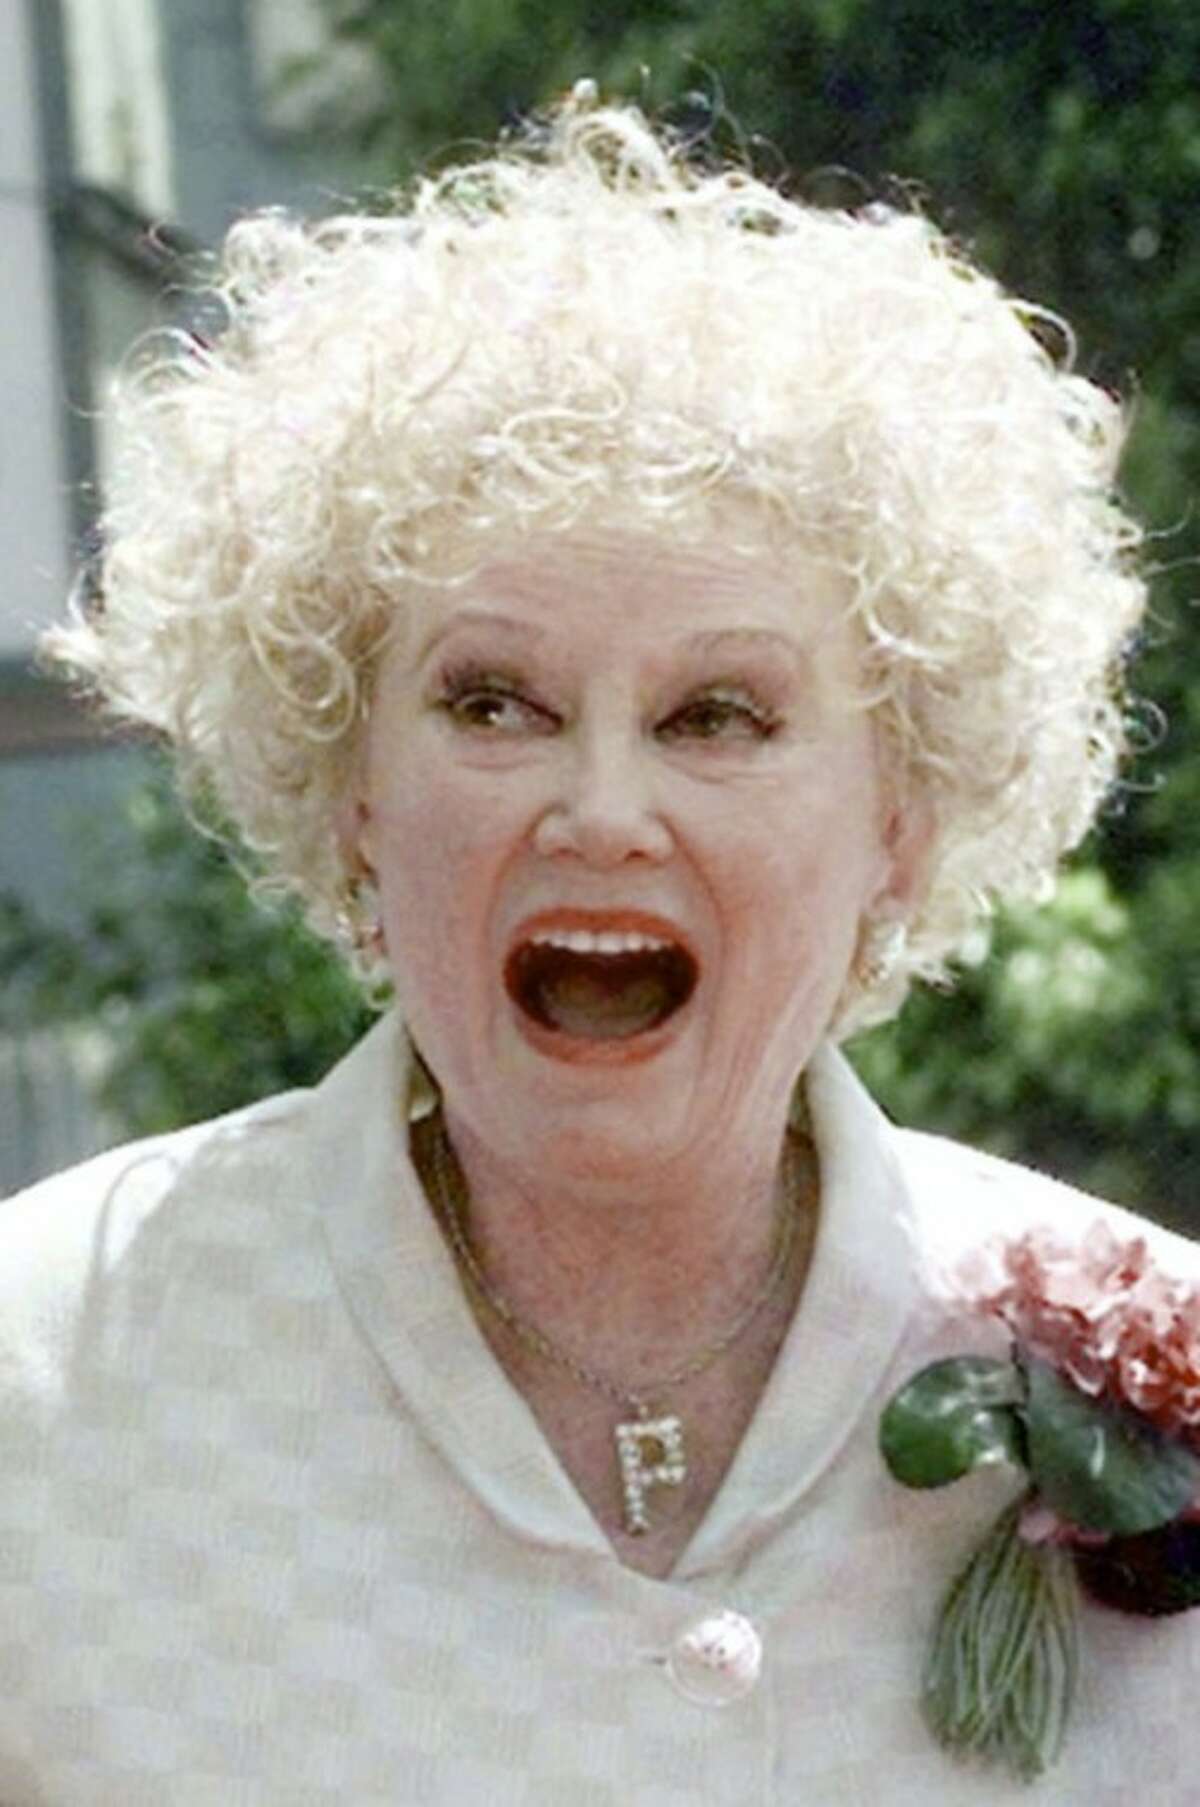 FILE-In this May 17, 1999 file photo, Phyllis Diller laughs in the Hollywood section of Los Angeles. Diller, the housewife turned humorist who aimed some of her sharpest barbs at herself, died Monday, Aug. 20, 2012, at age 95 in Los Angeles. (AP Photo/Nick Ut, File)